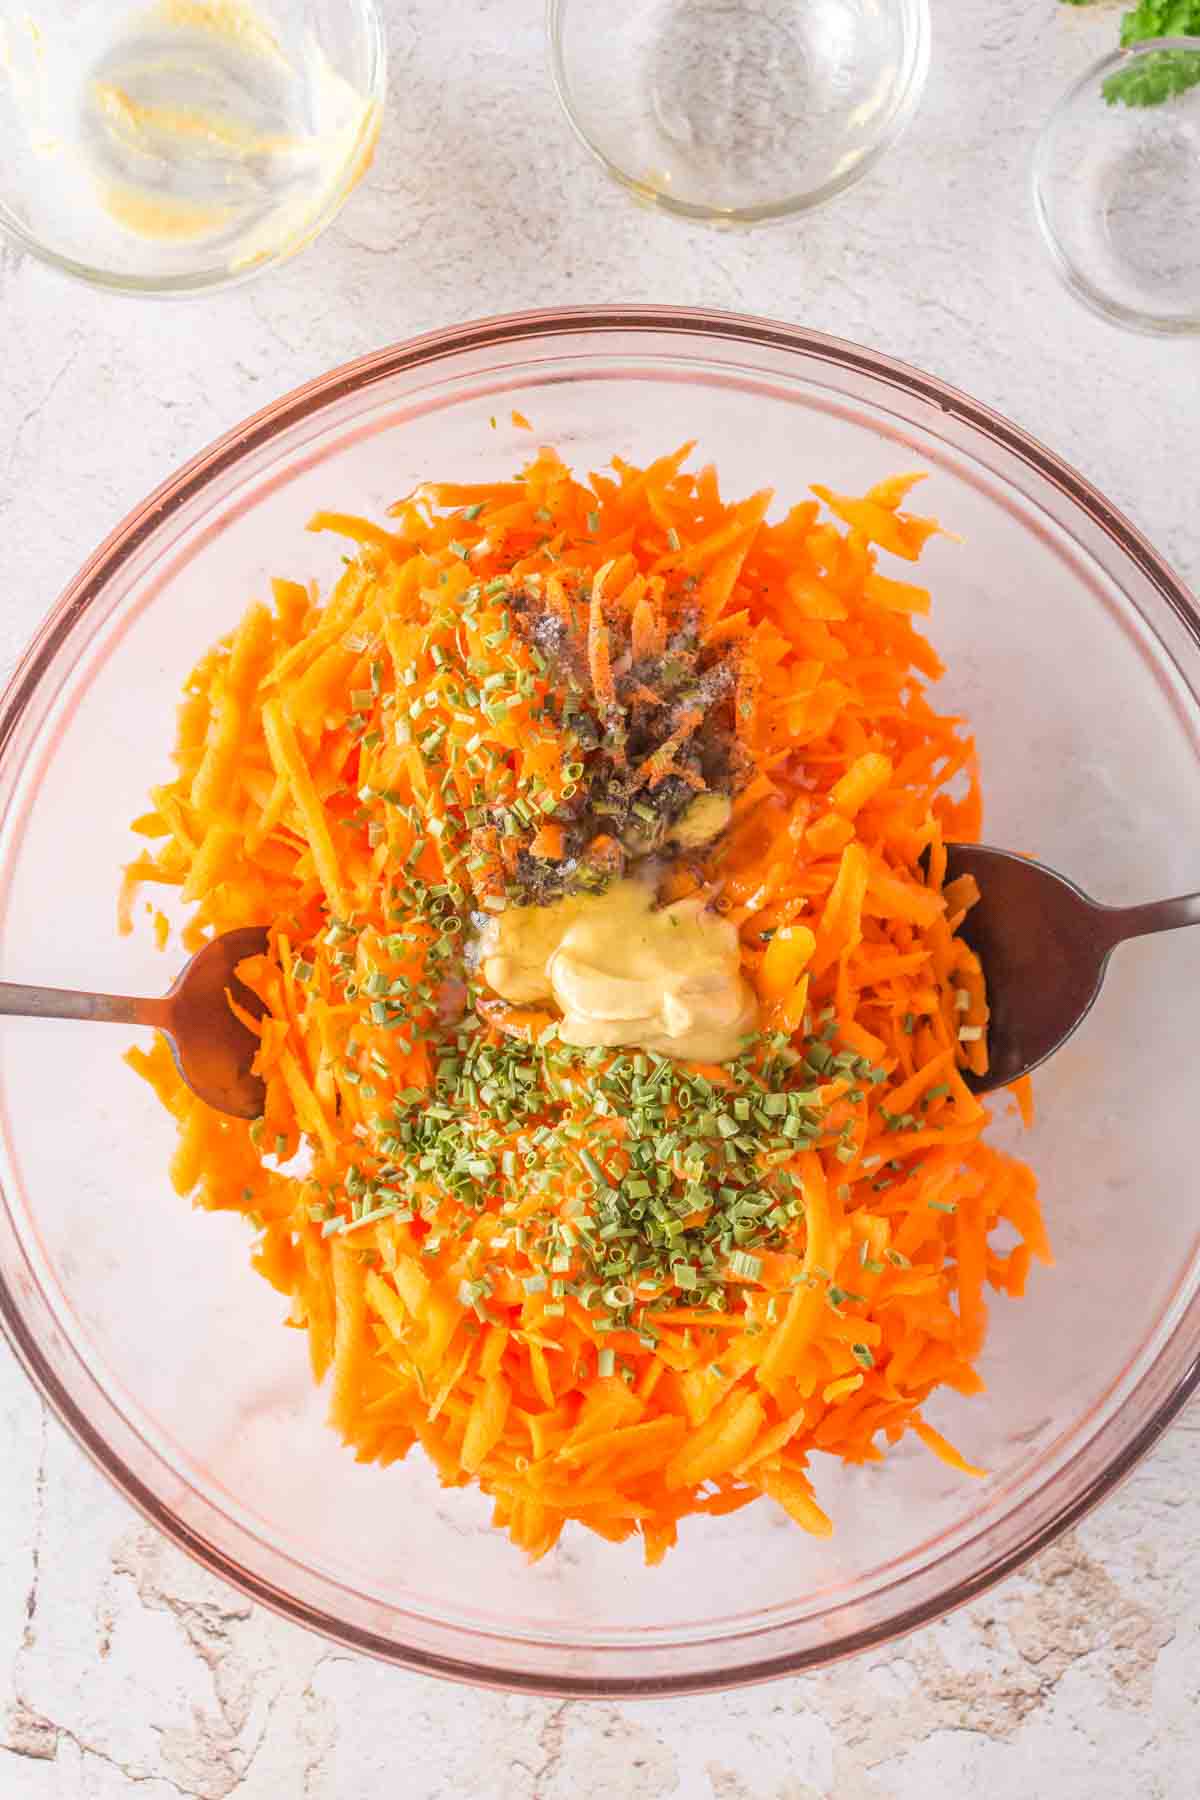 carrot salad ingredients in a mixing bowl